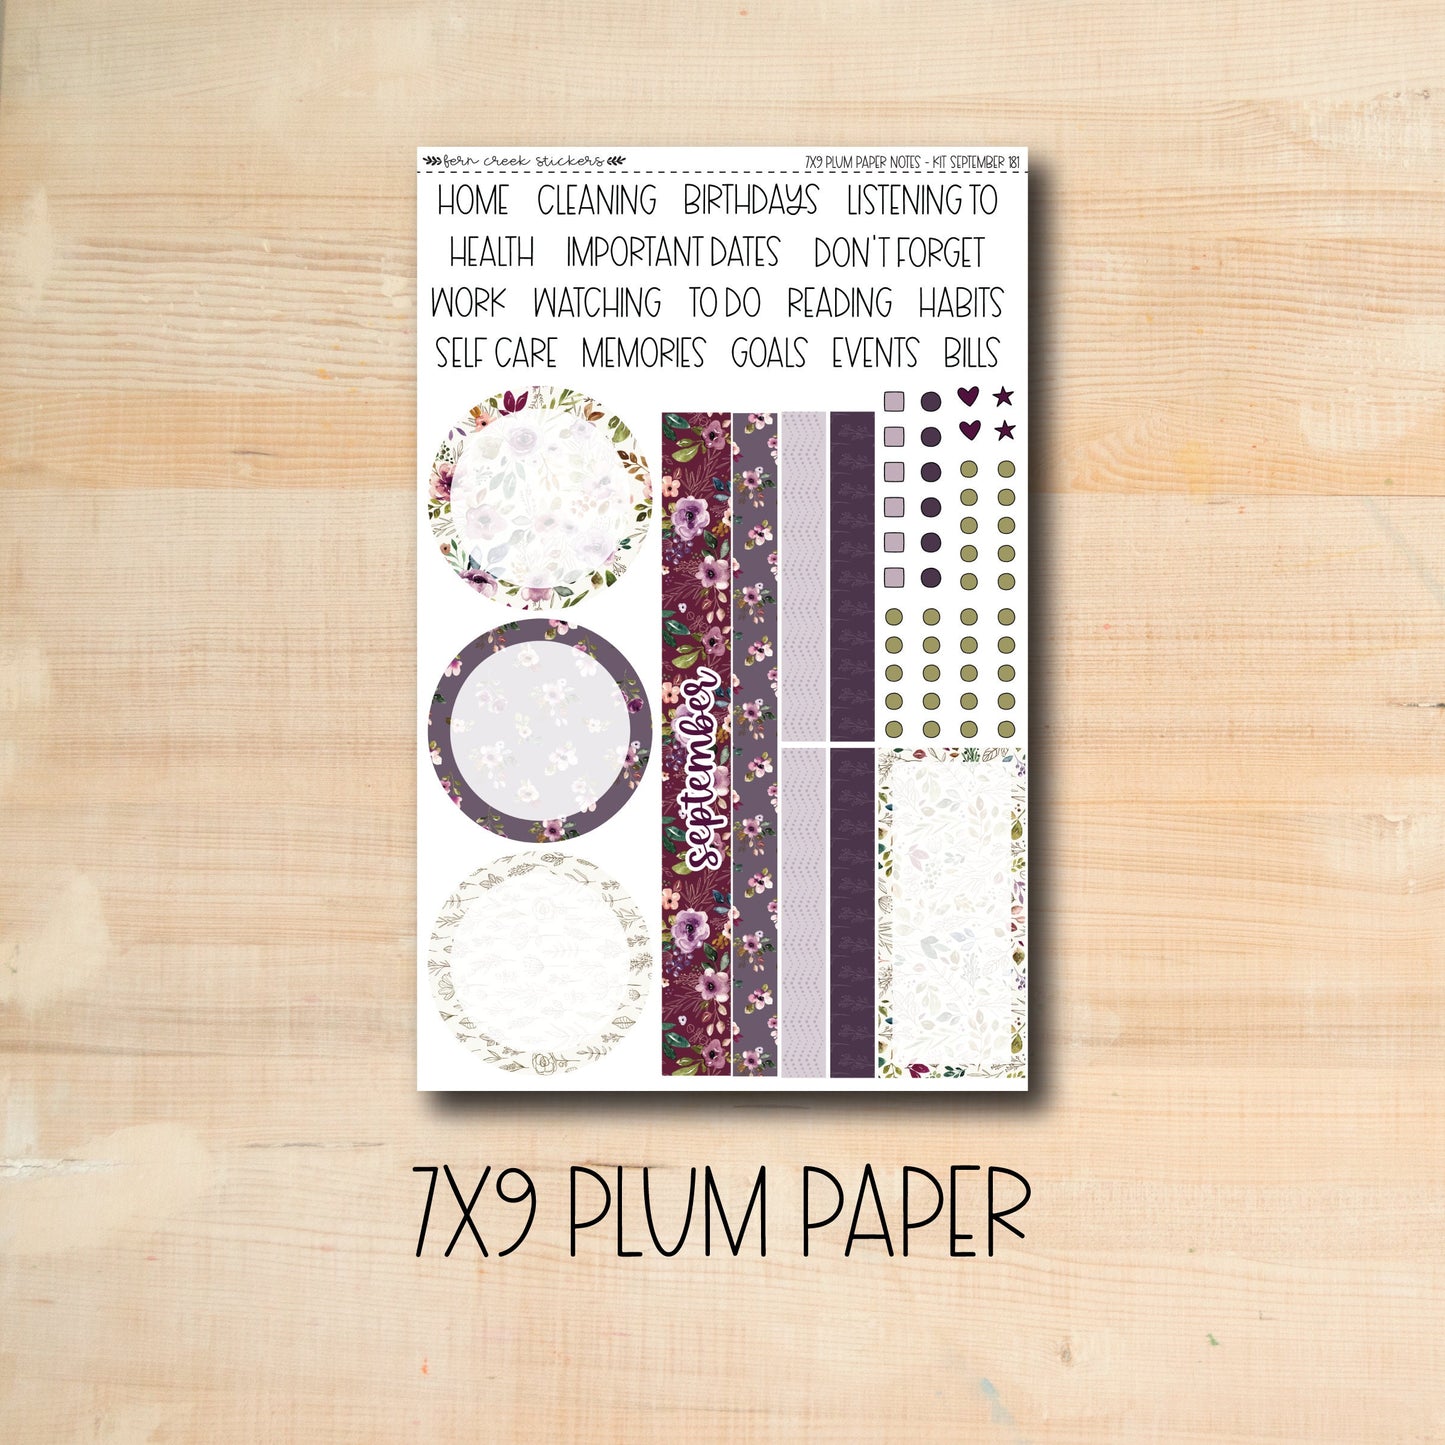 7x9 Plum NOTES-181 || AUTUMN AMETHYST 7x9 Plum Paper September notes page